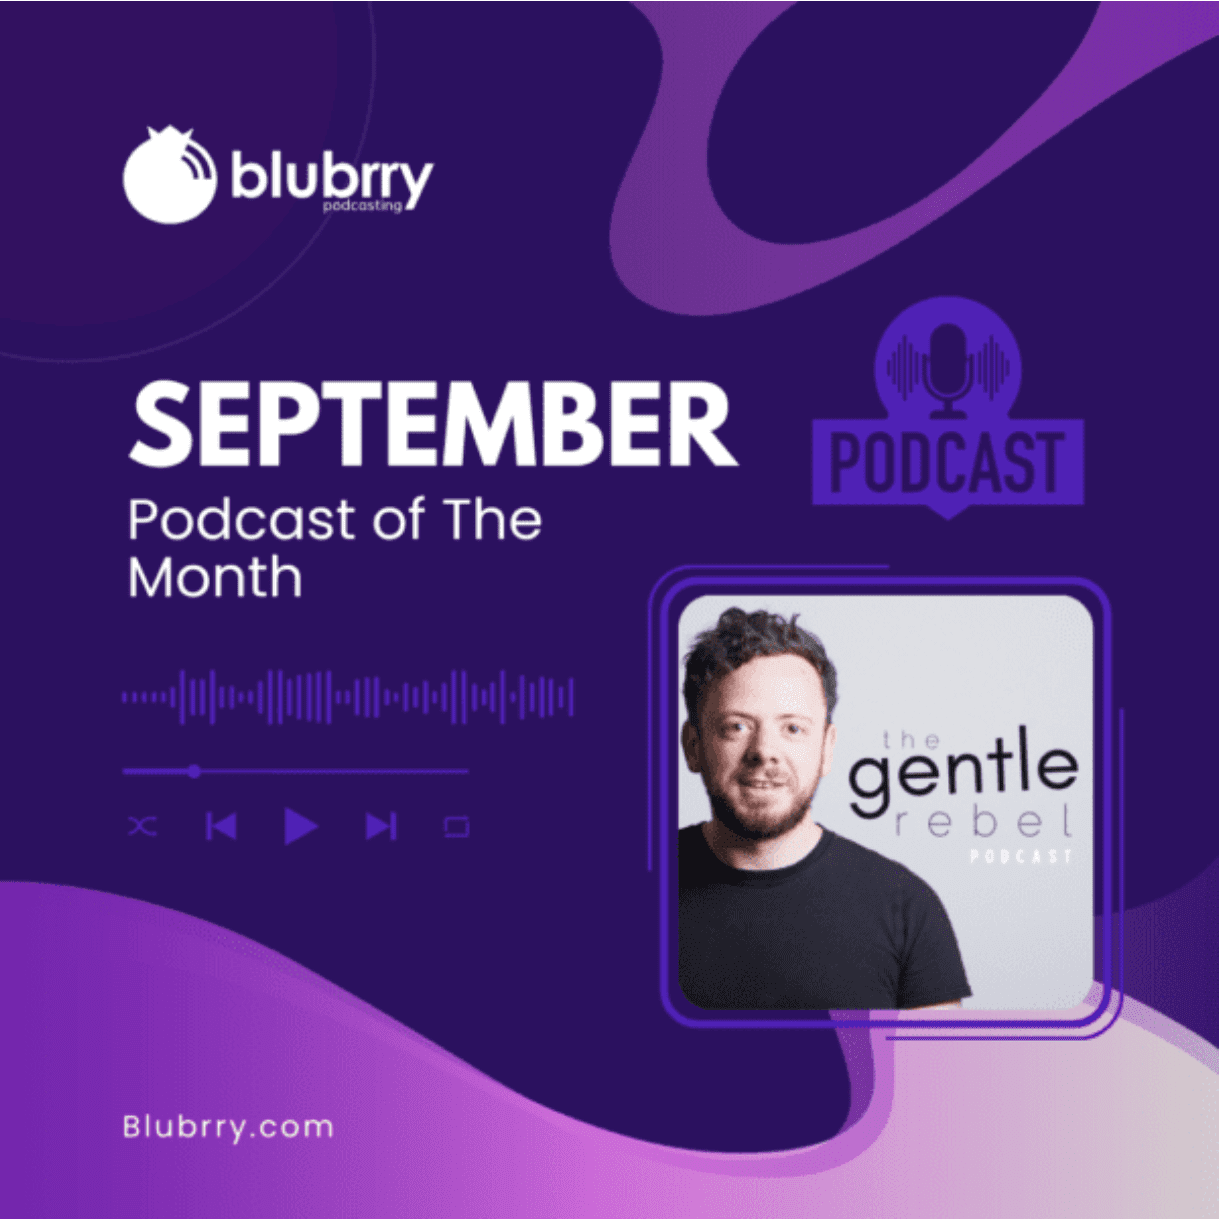 Podcast of The Month - The Gentle Rebel